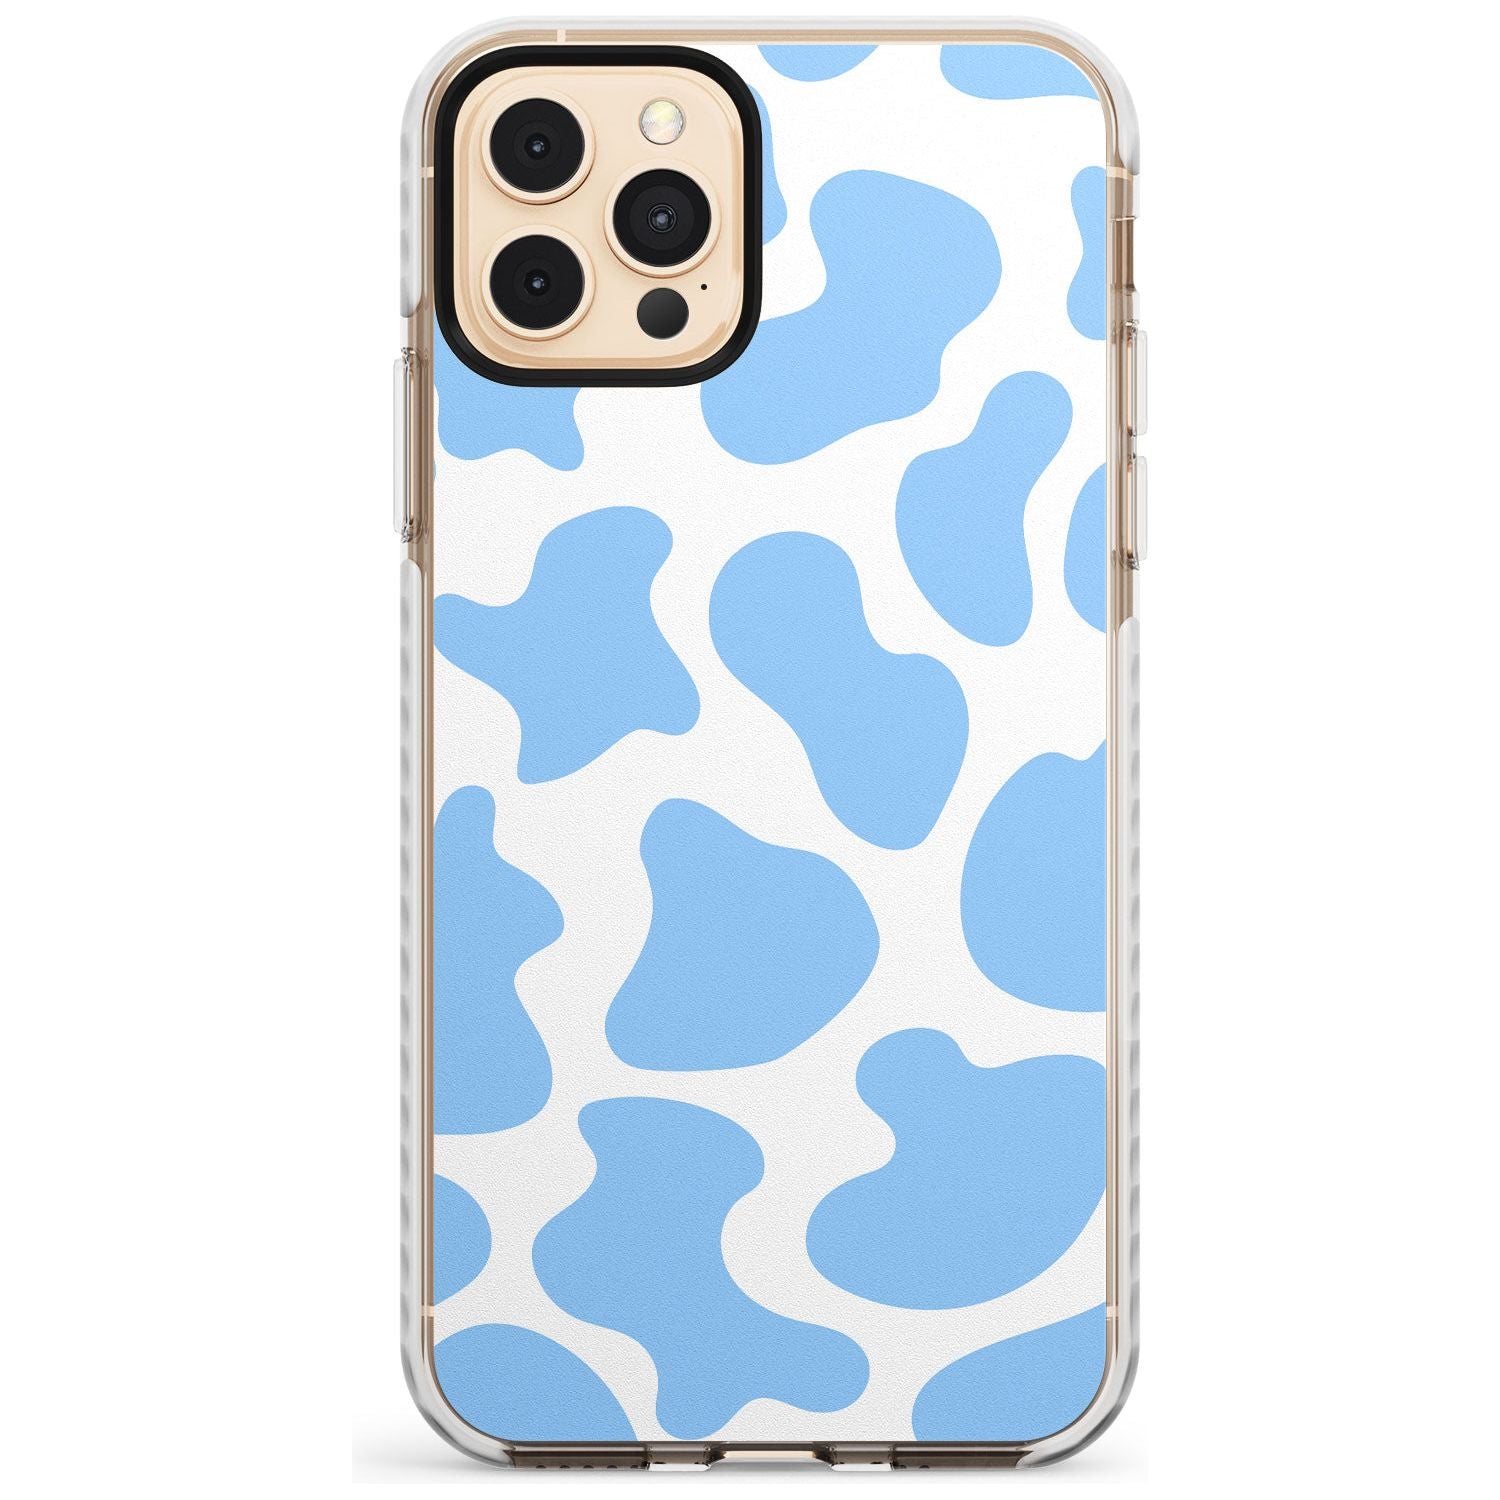 Blue and White Cow Print Impact Phone Case for iPhone 11 Pro Max